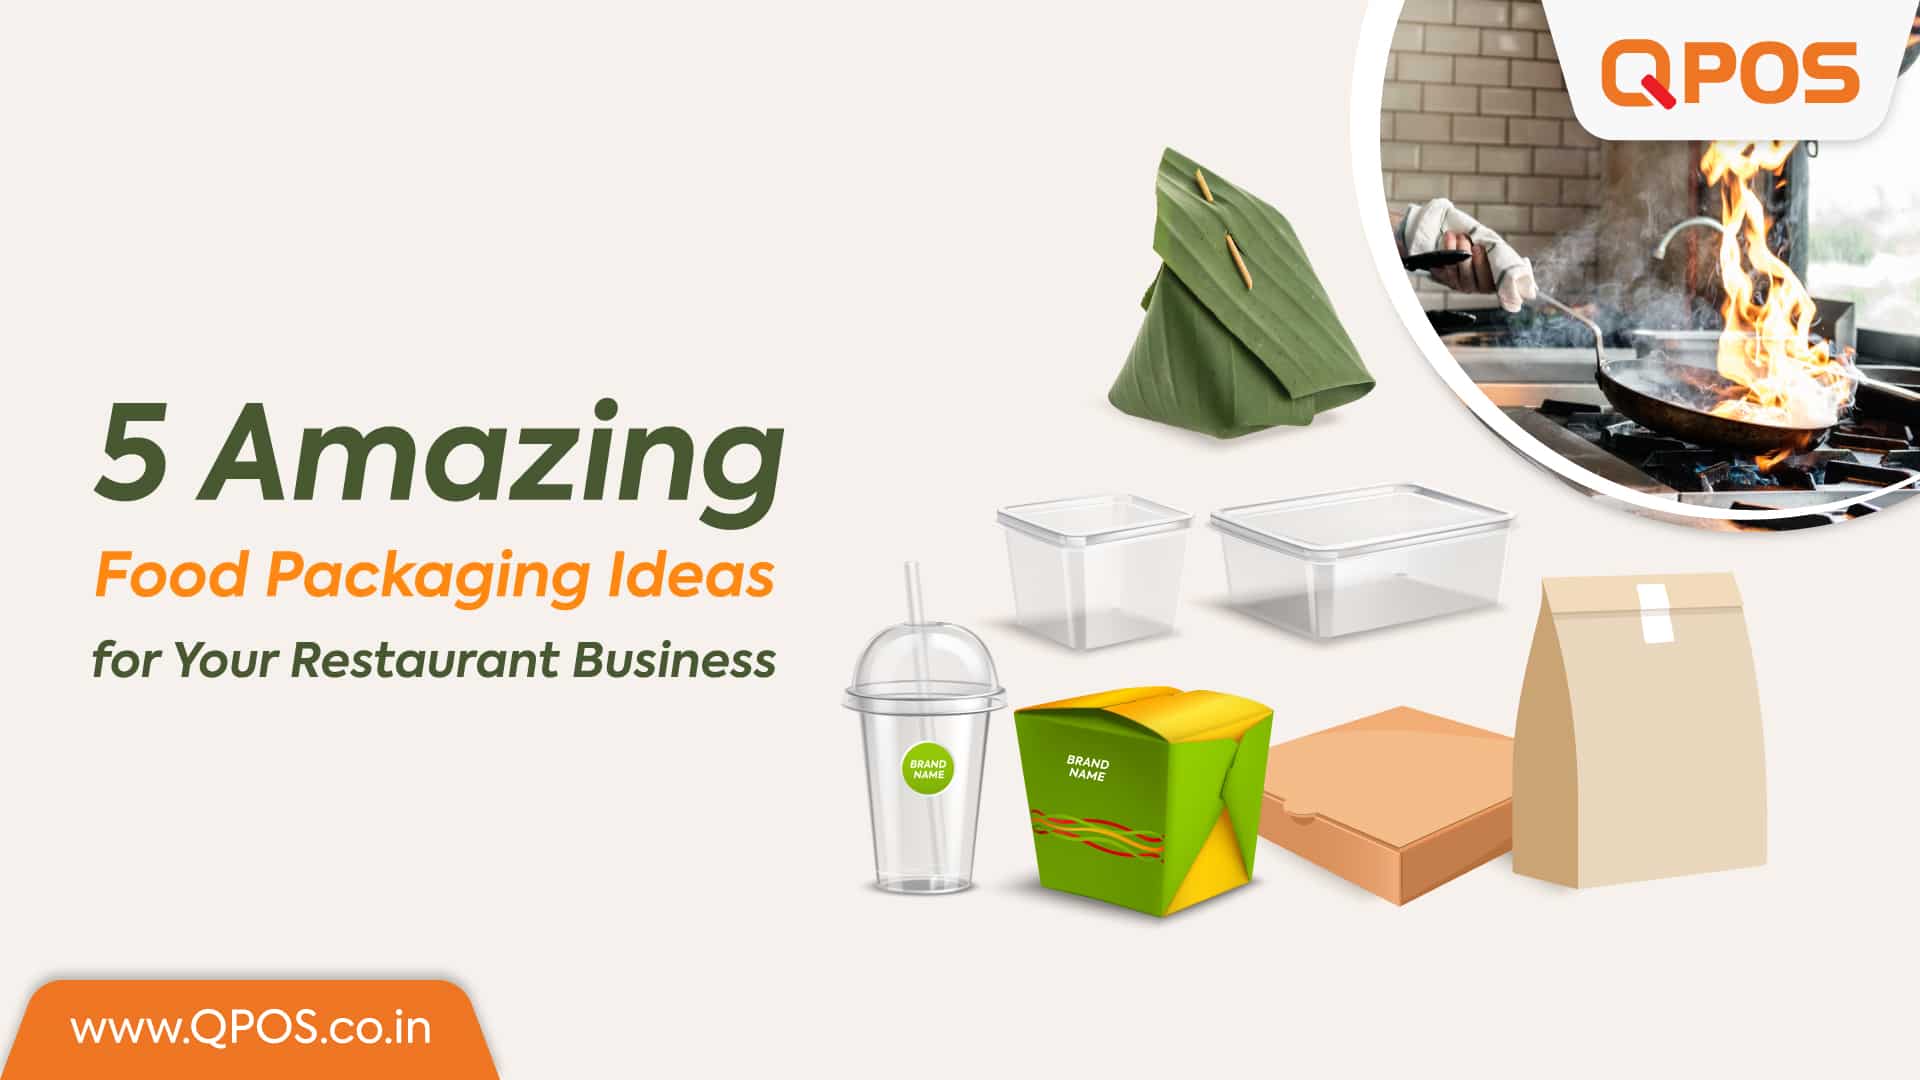 5 Amazing Food Packaging Ideas for Your Restaurant